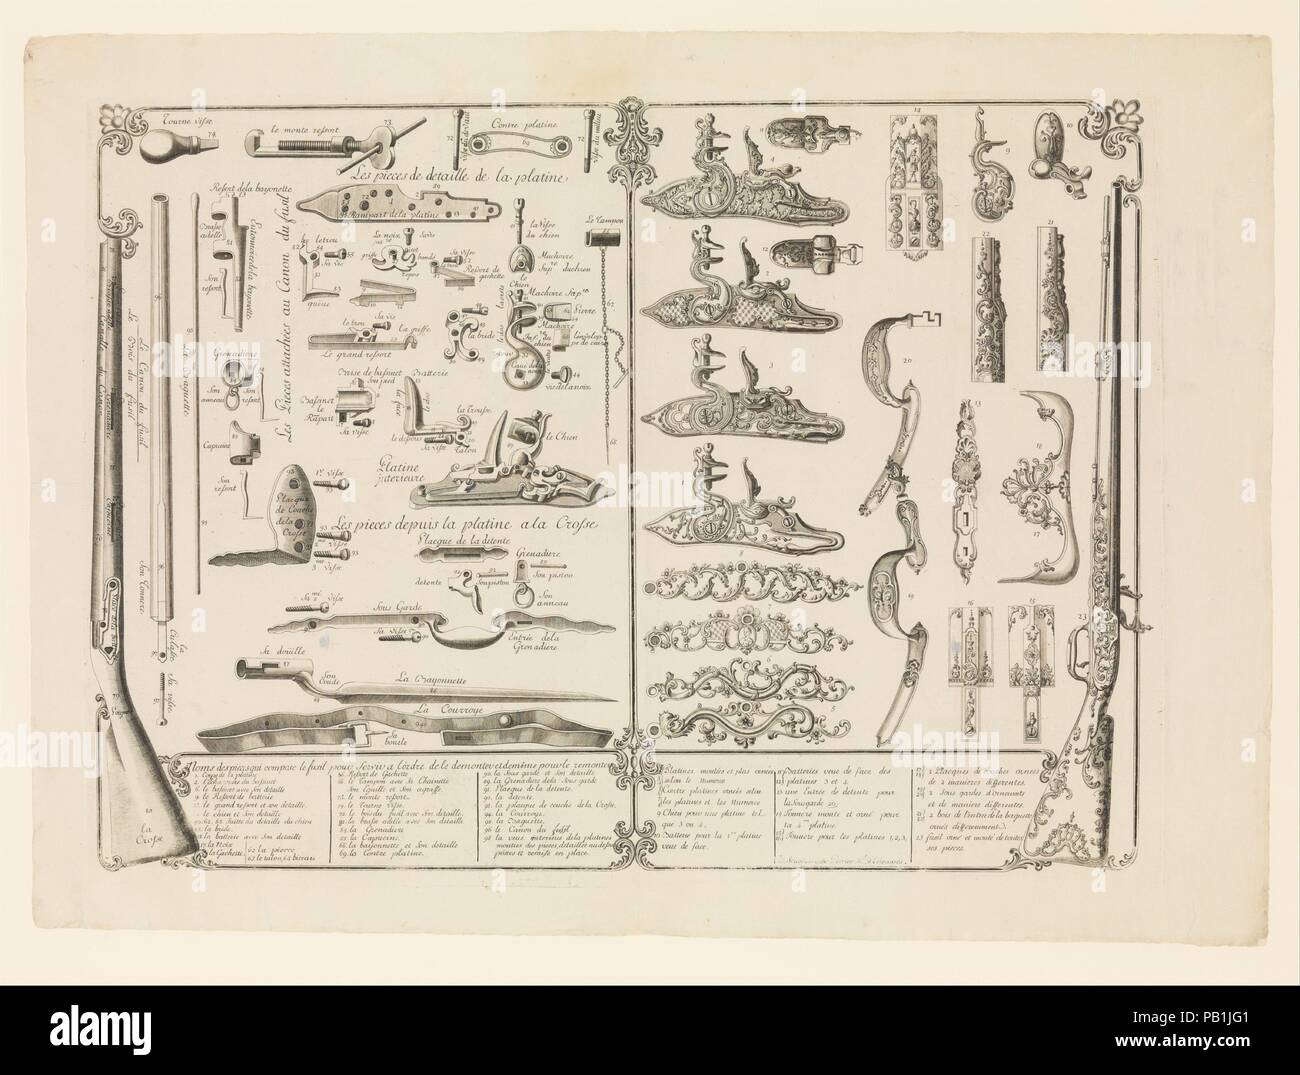 Engraving of Firearms Parts. Culture: French, Strasbourg. Designer: Perrier (French, Strasbourg, active mid-18th century). Dimensions: 18 3/4 x 25 1/4 in. (47.5  x 64 cm). Date: ca. 1750.  Made by a little-known engraver named Perrier, this rare and informative print illustrates and names all of the parts found in a flintlock gun. A standard military musket is shown in detail on the left and the decorated parts of a more elaborate civilian hunting gun appear on the right. Museum: Metropolitan Museum of Art, New York, USA. Stock Photo